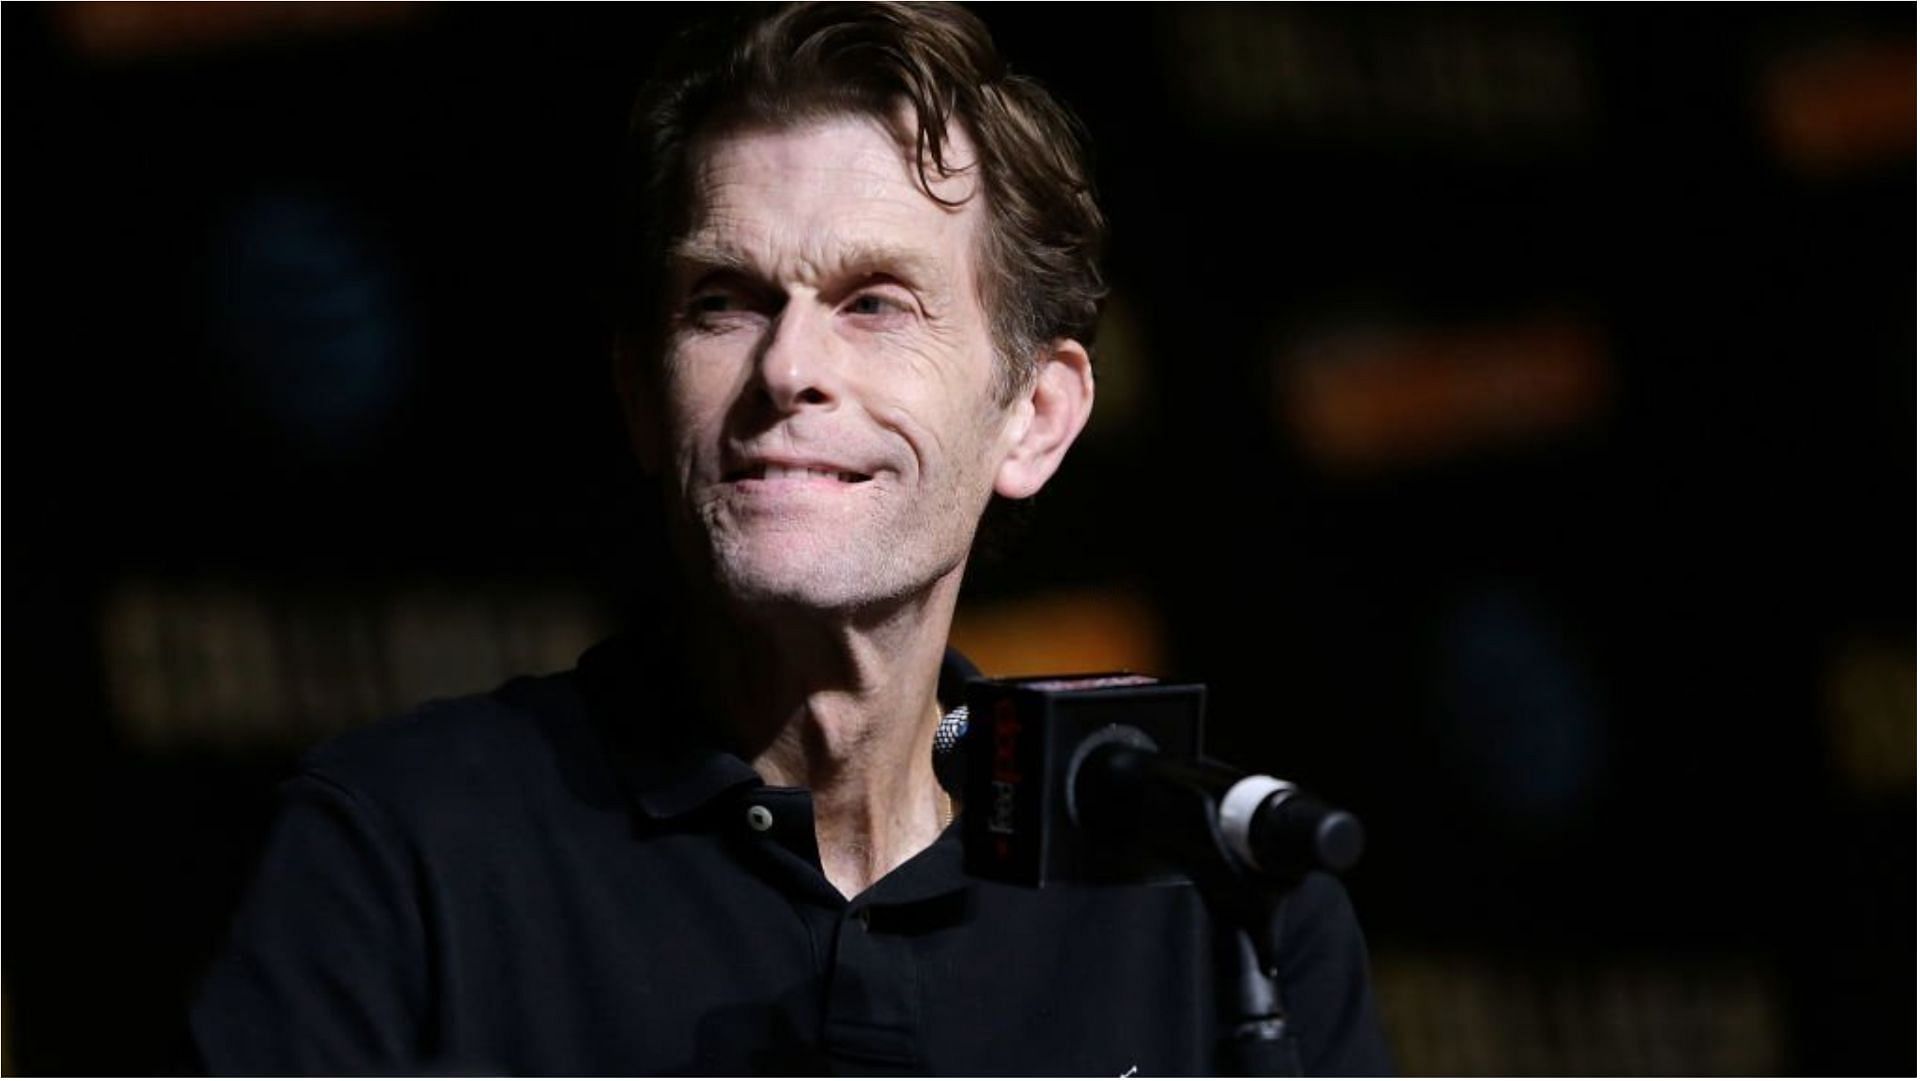 Kevin Conroy became popular for voicing Batman in various films and animated shows (Image via John Lamparski/Getty Images)